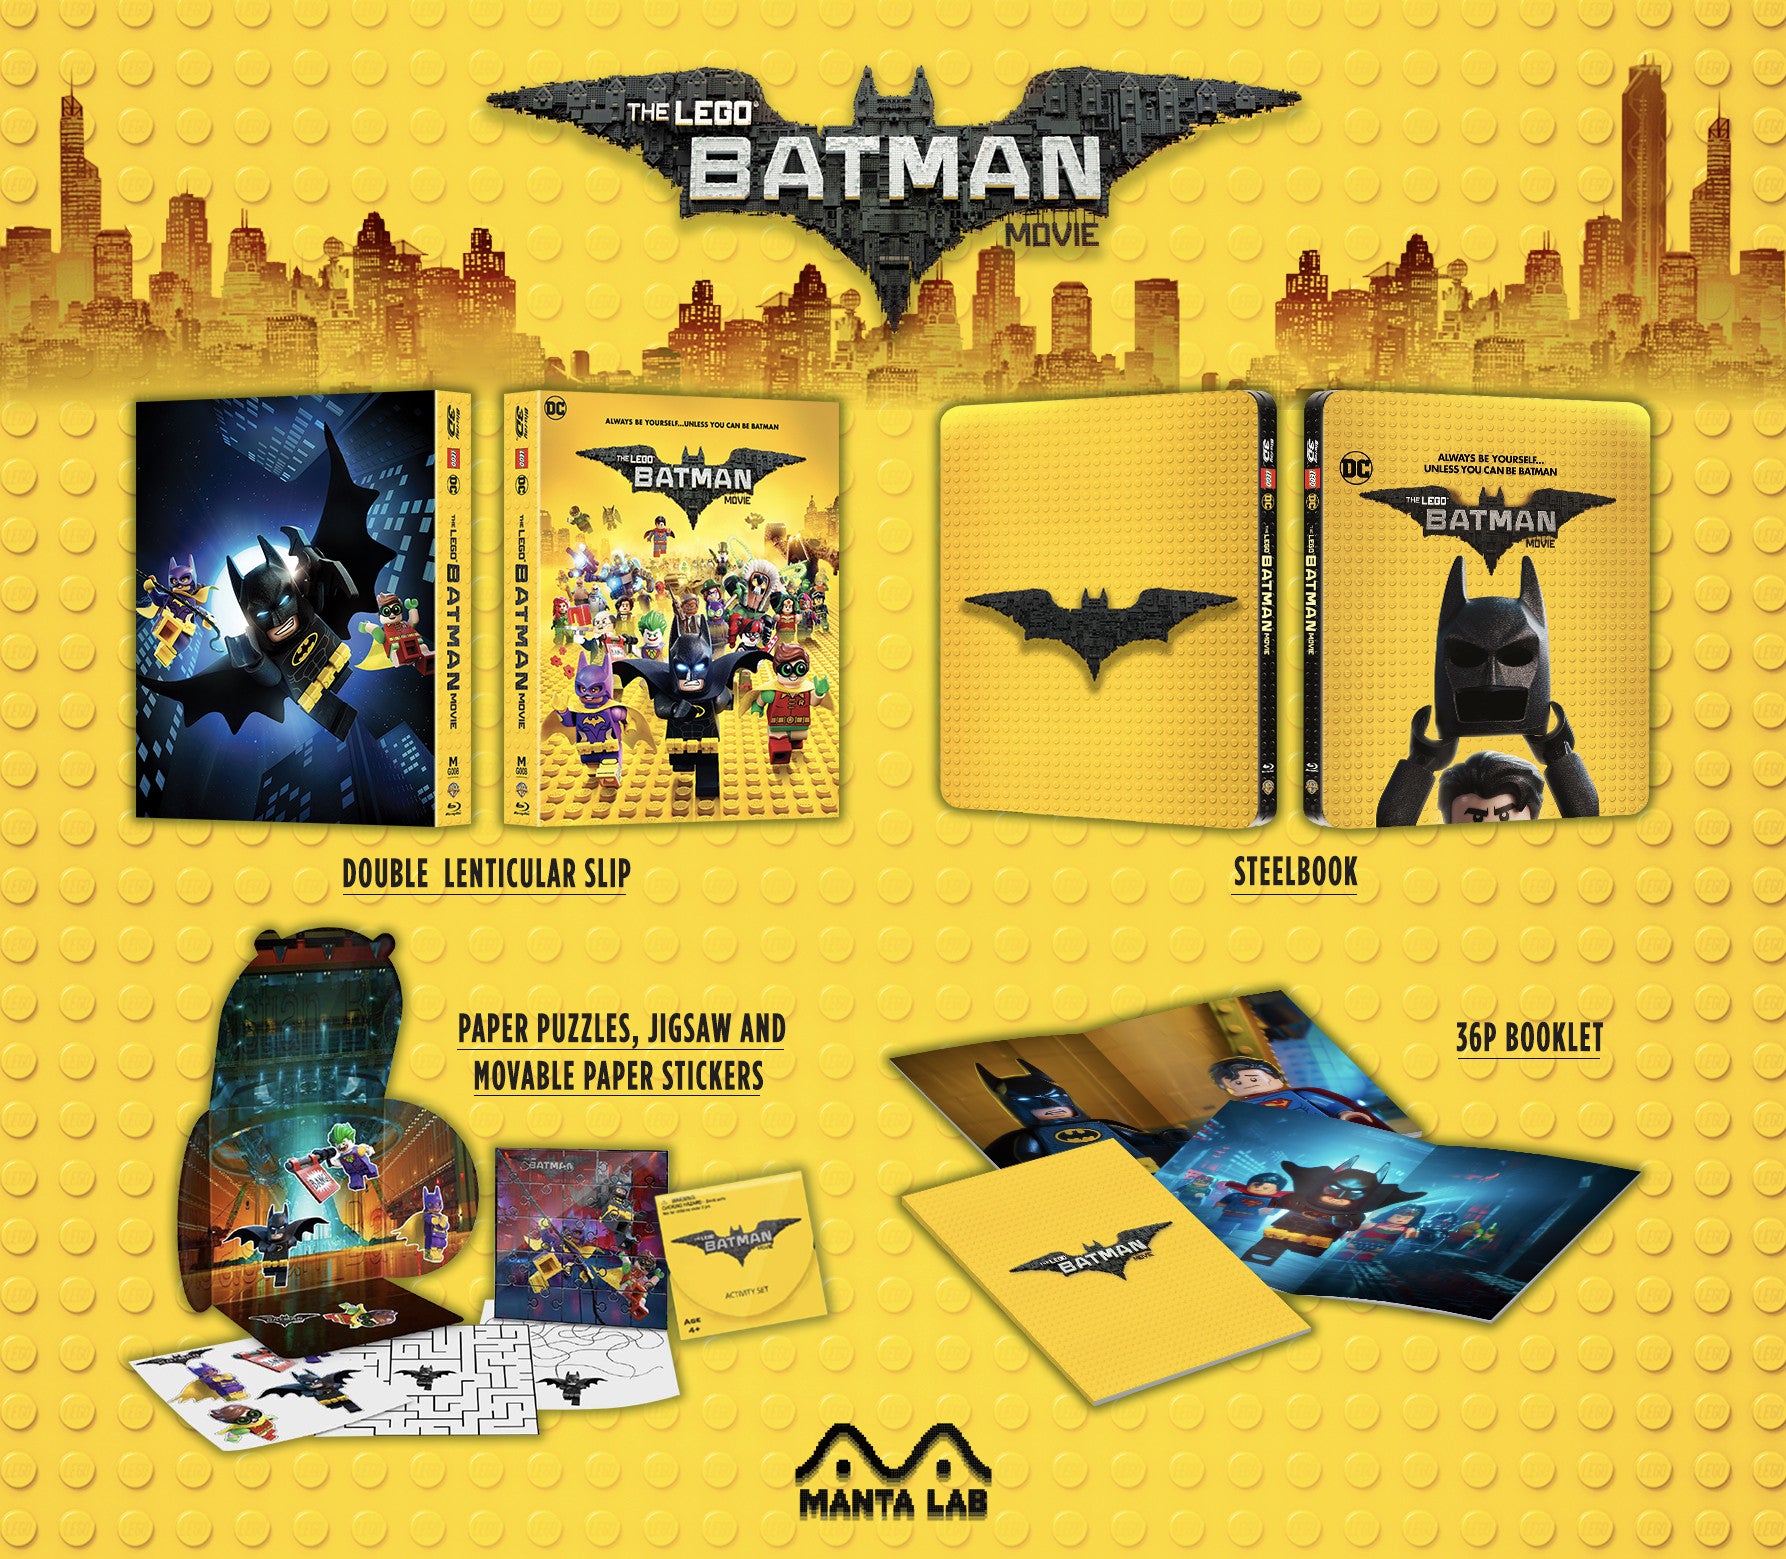 Wave II of the Lego Batman MOvie Sets Official Box Art Images